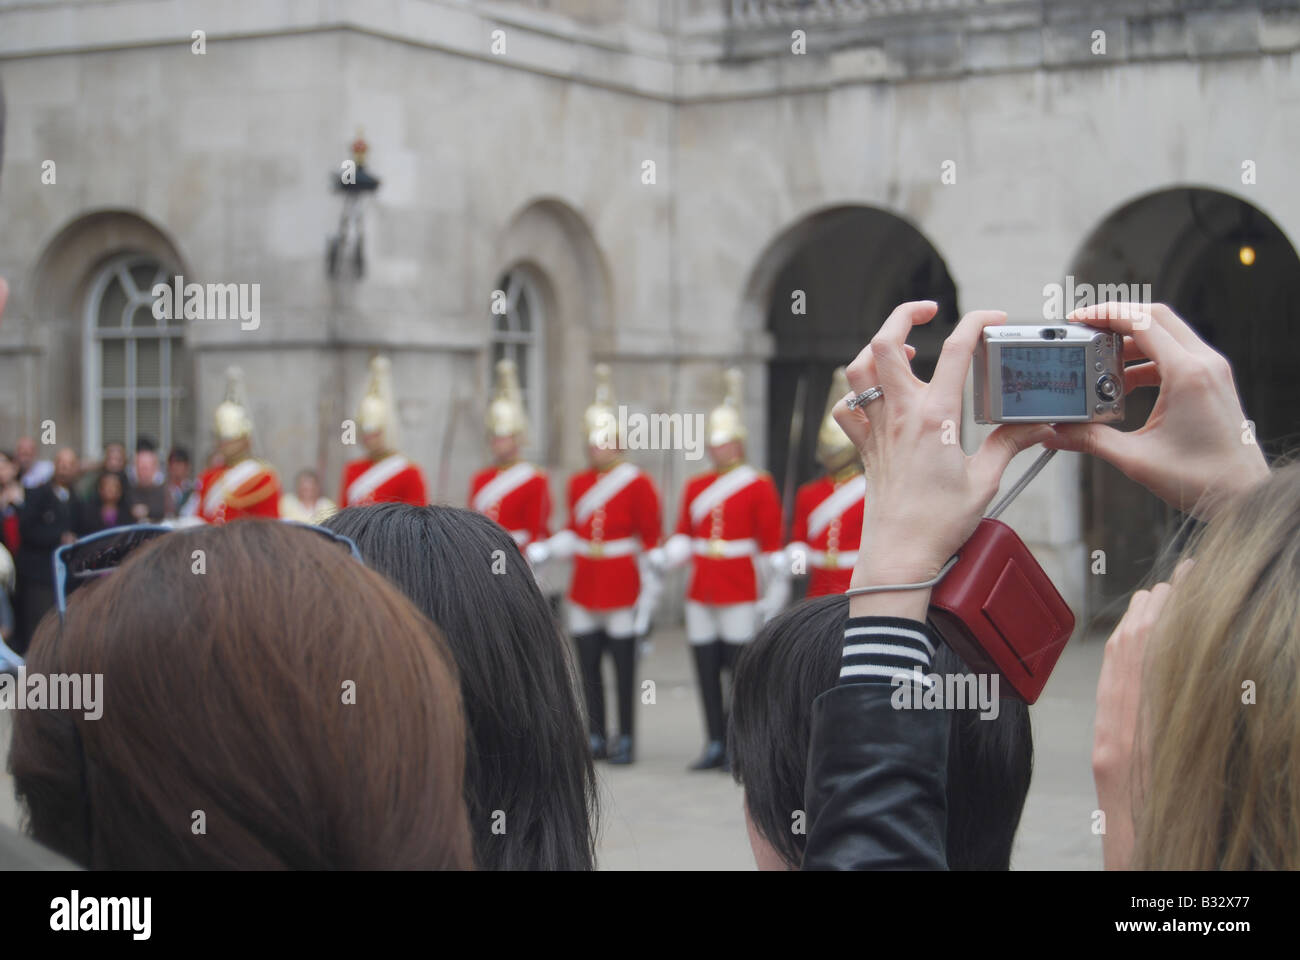 Changing of the guard Horse Guards Parade London Tourism Camera photography event Stock Photo